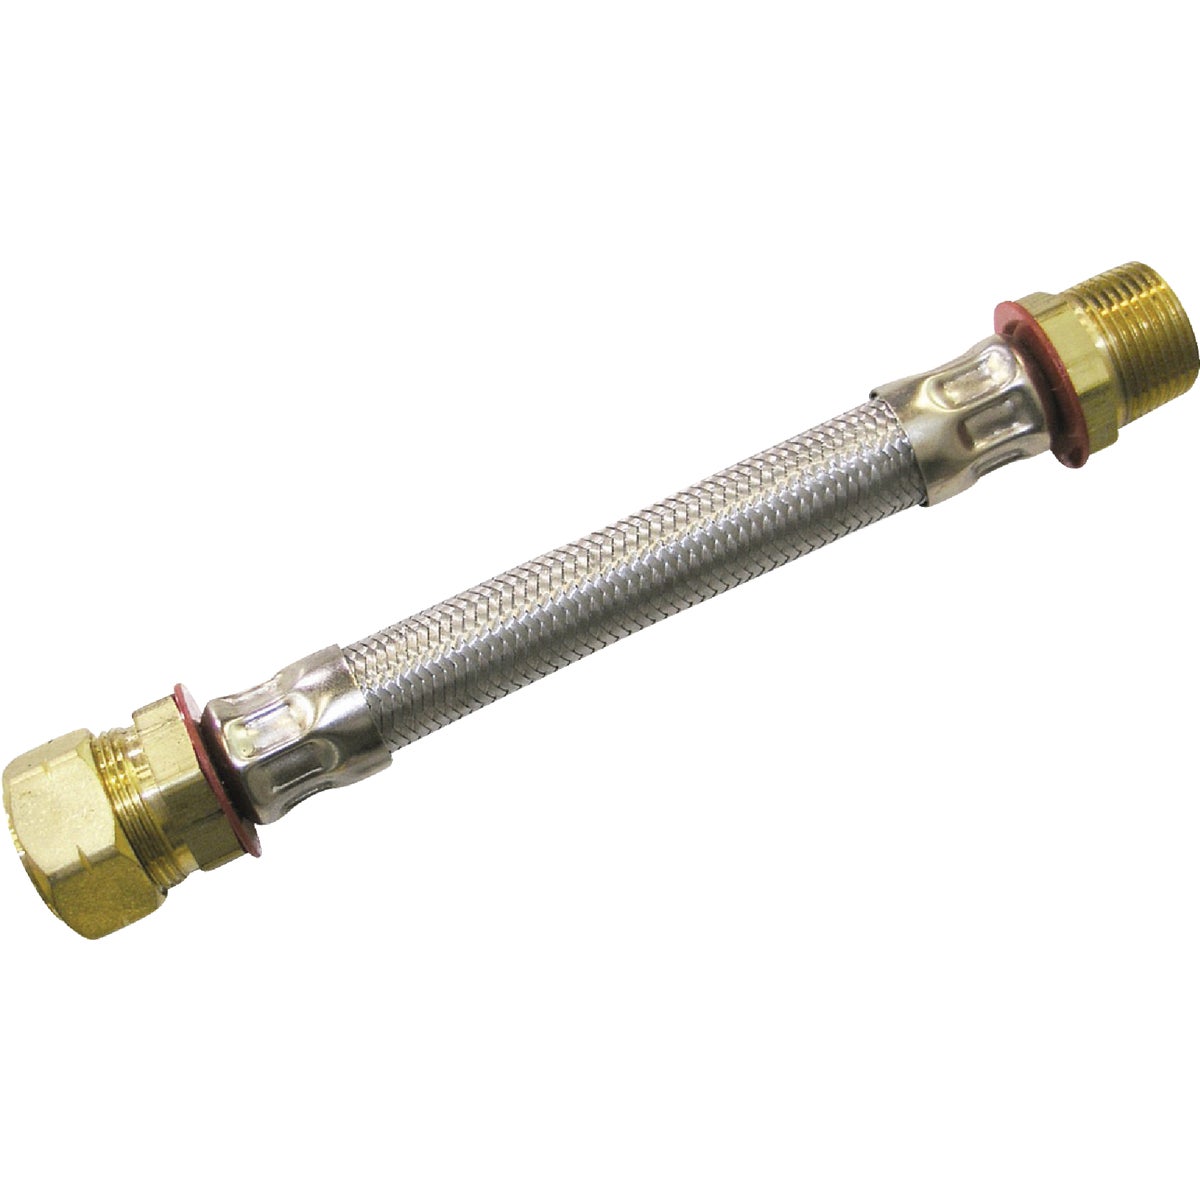 Item 413585, Water heater connector.